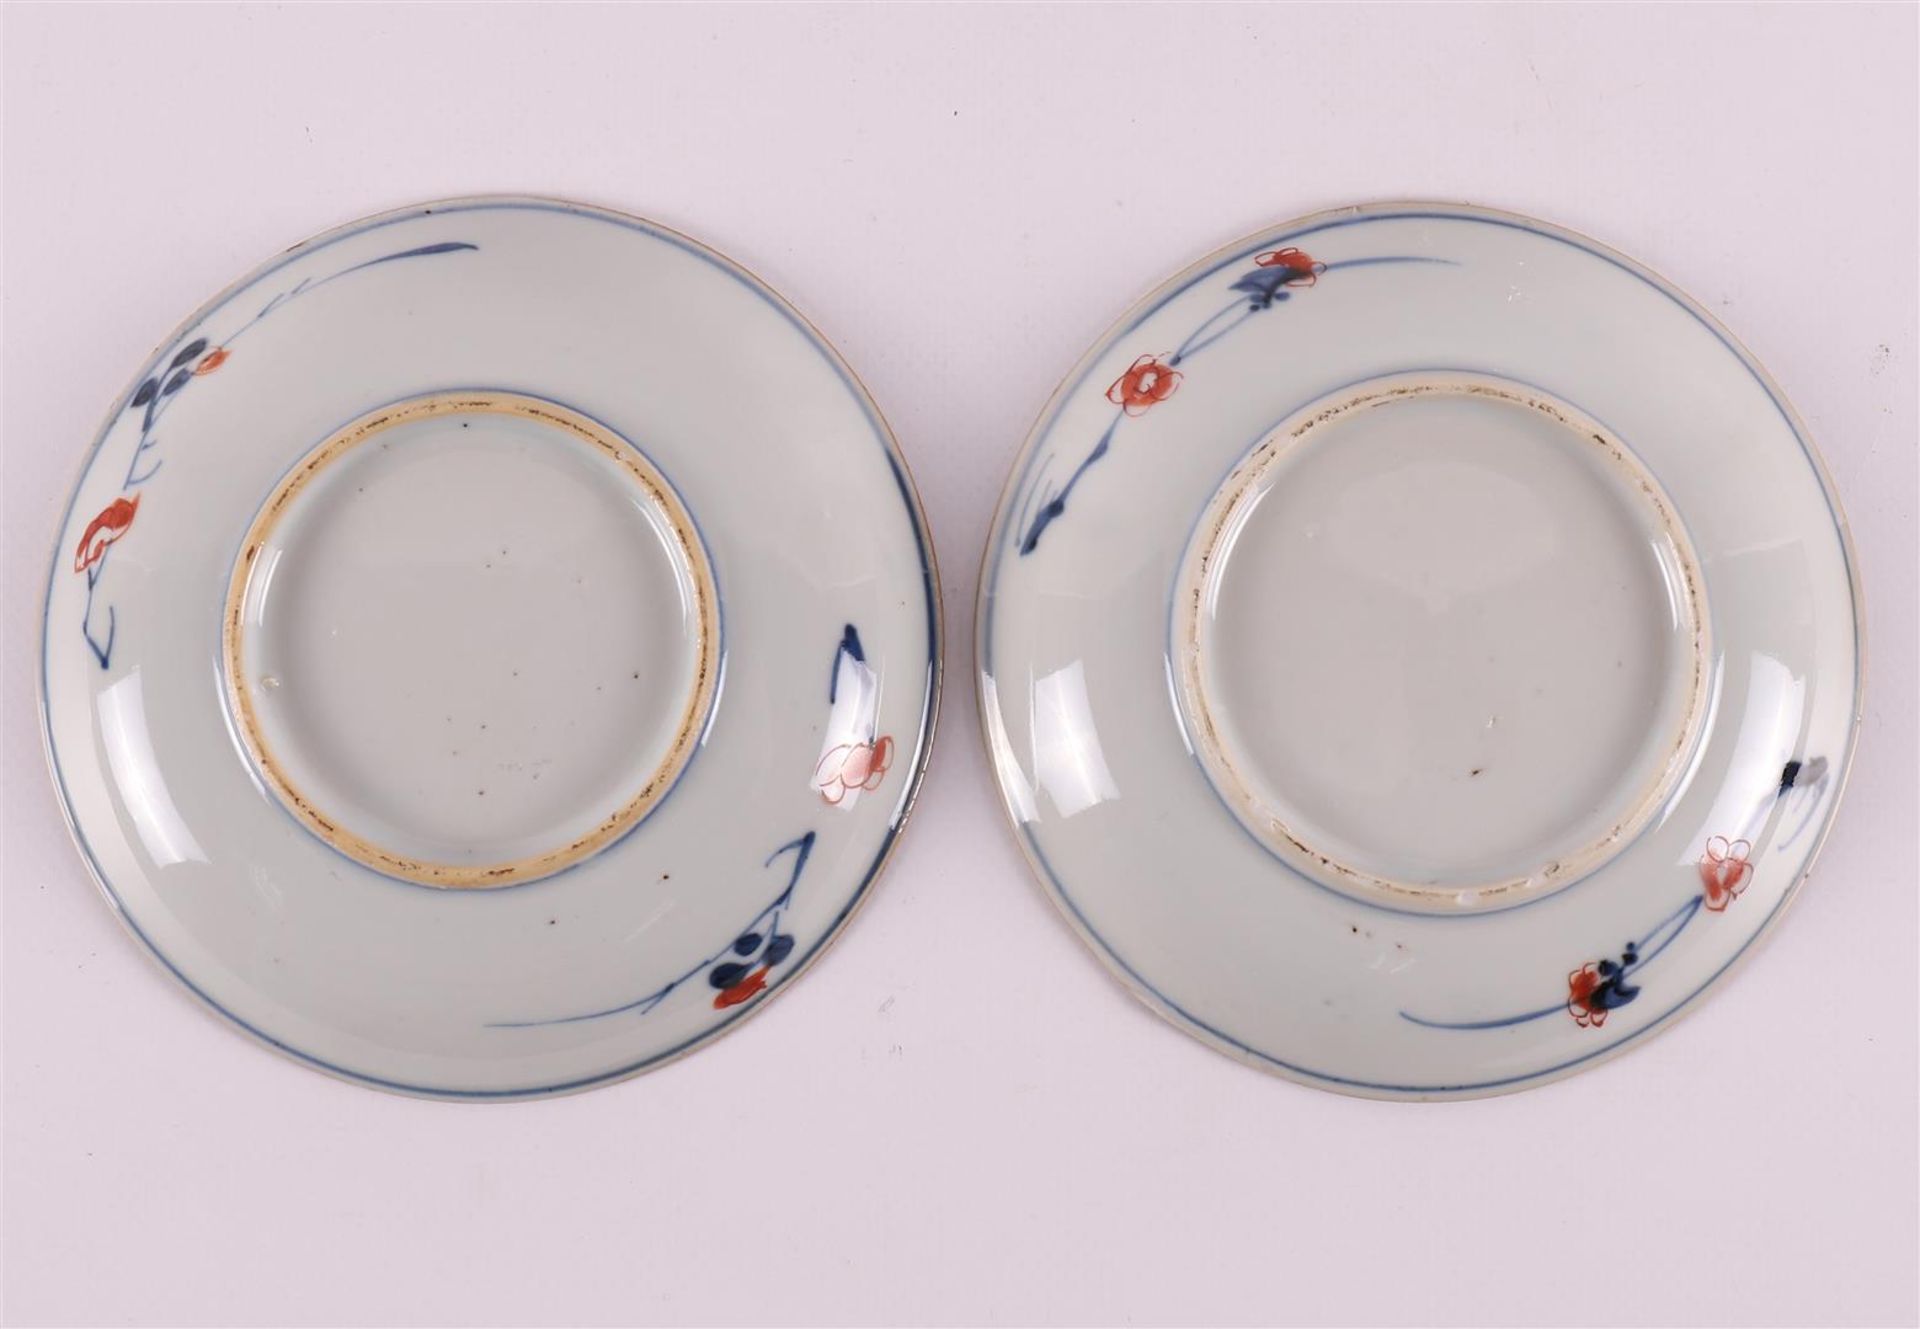 Three various blue/white porcelain plates, China, Qing Dynasty, around 1800. - Image 10 of 10